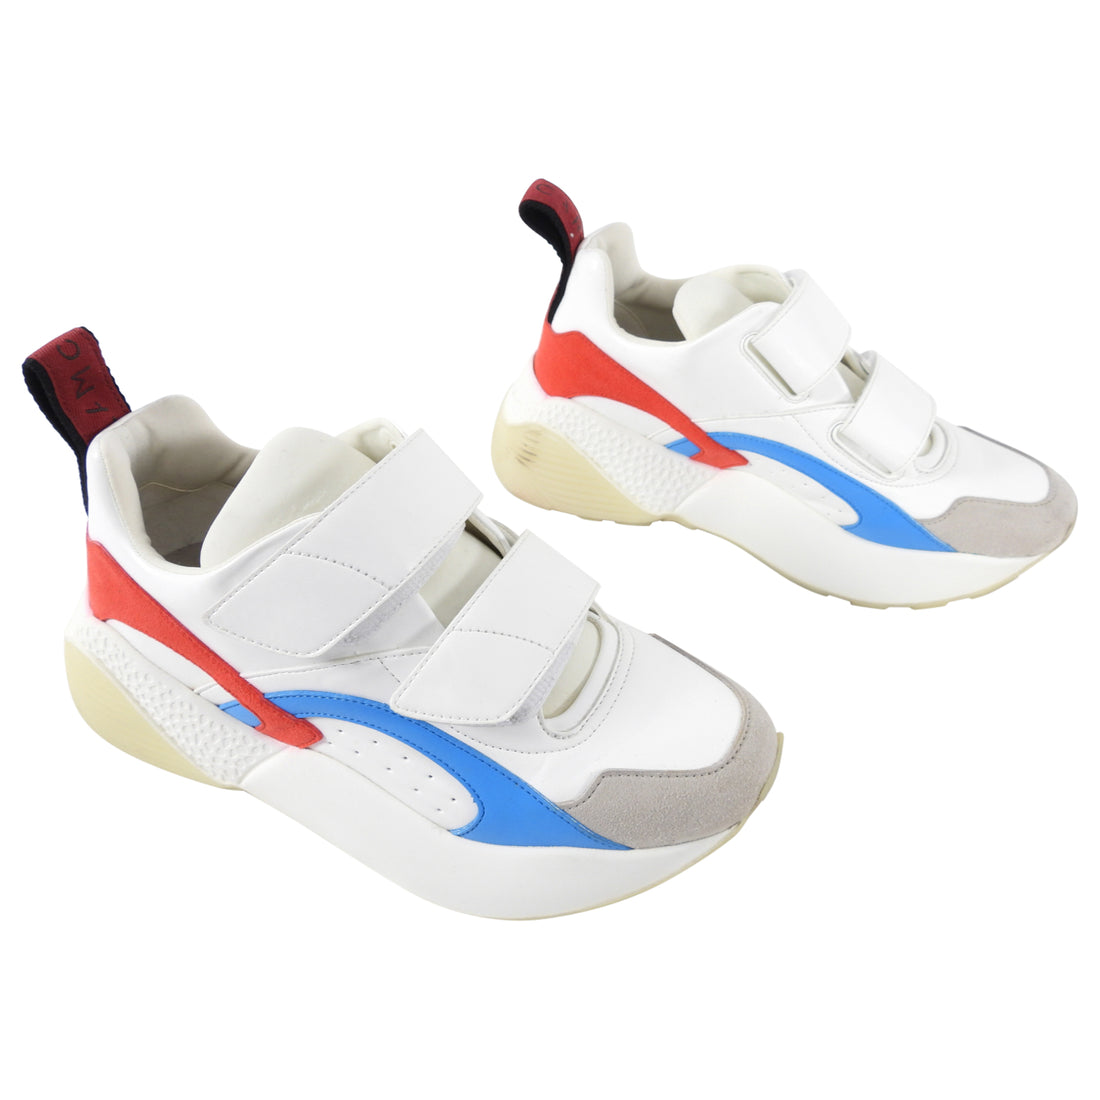 Stella McCartney White, Red, Blue Chunky Sneakers - USA 6.5